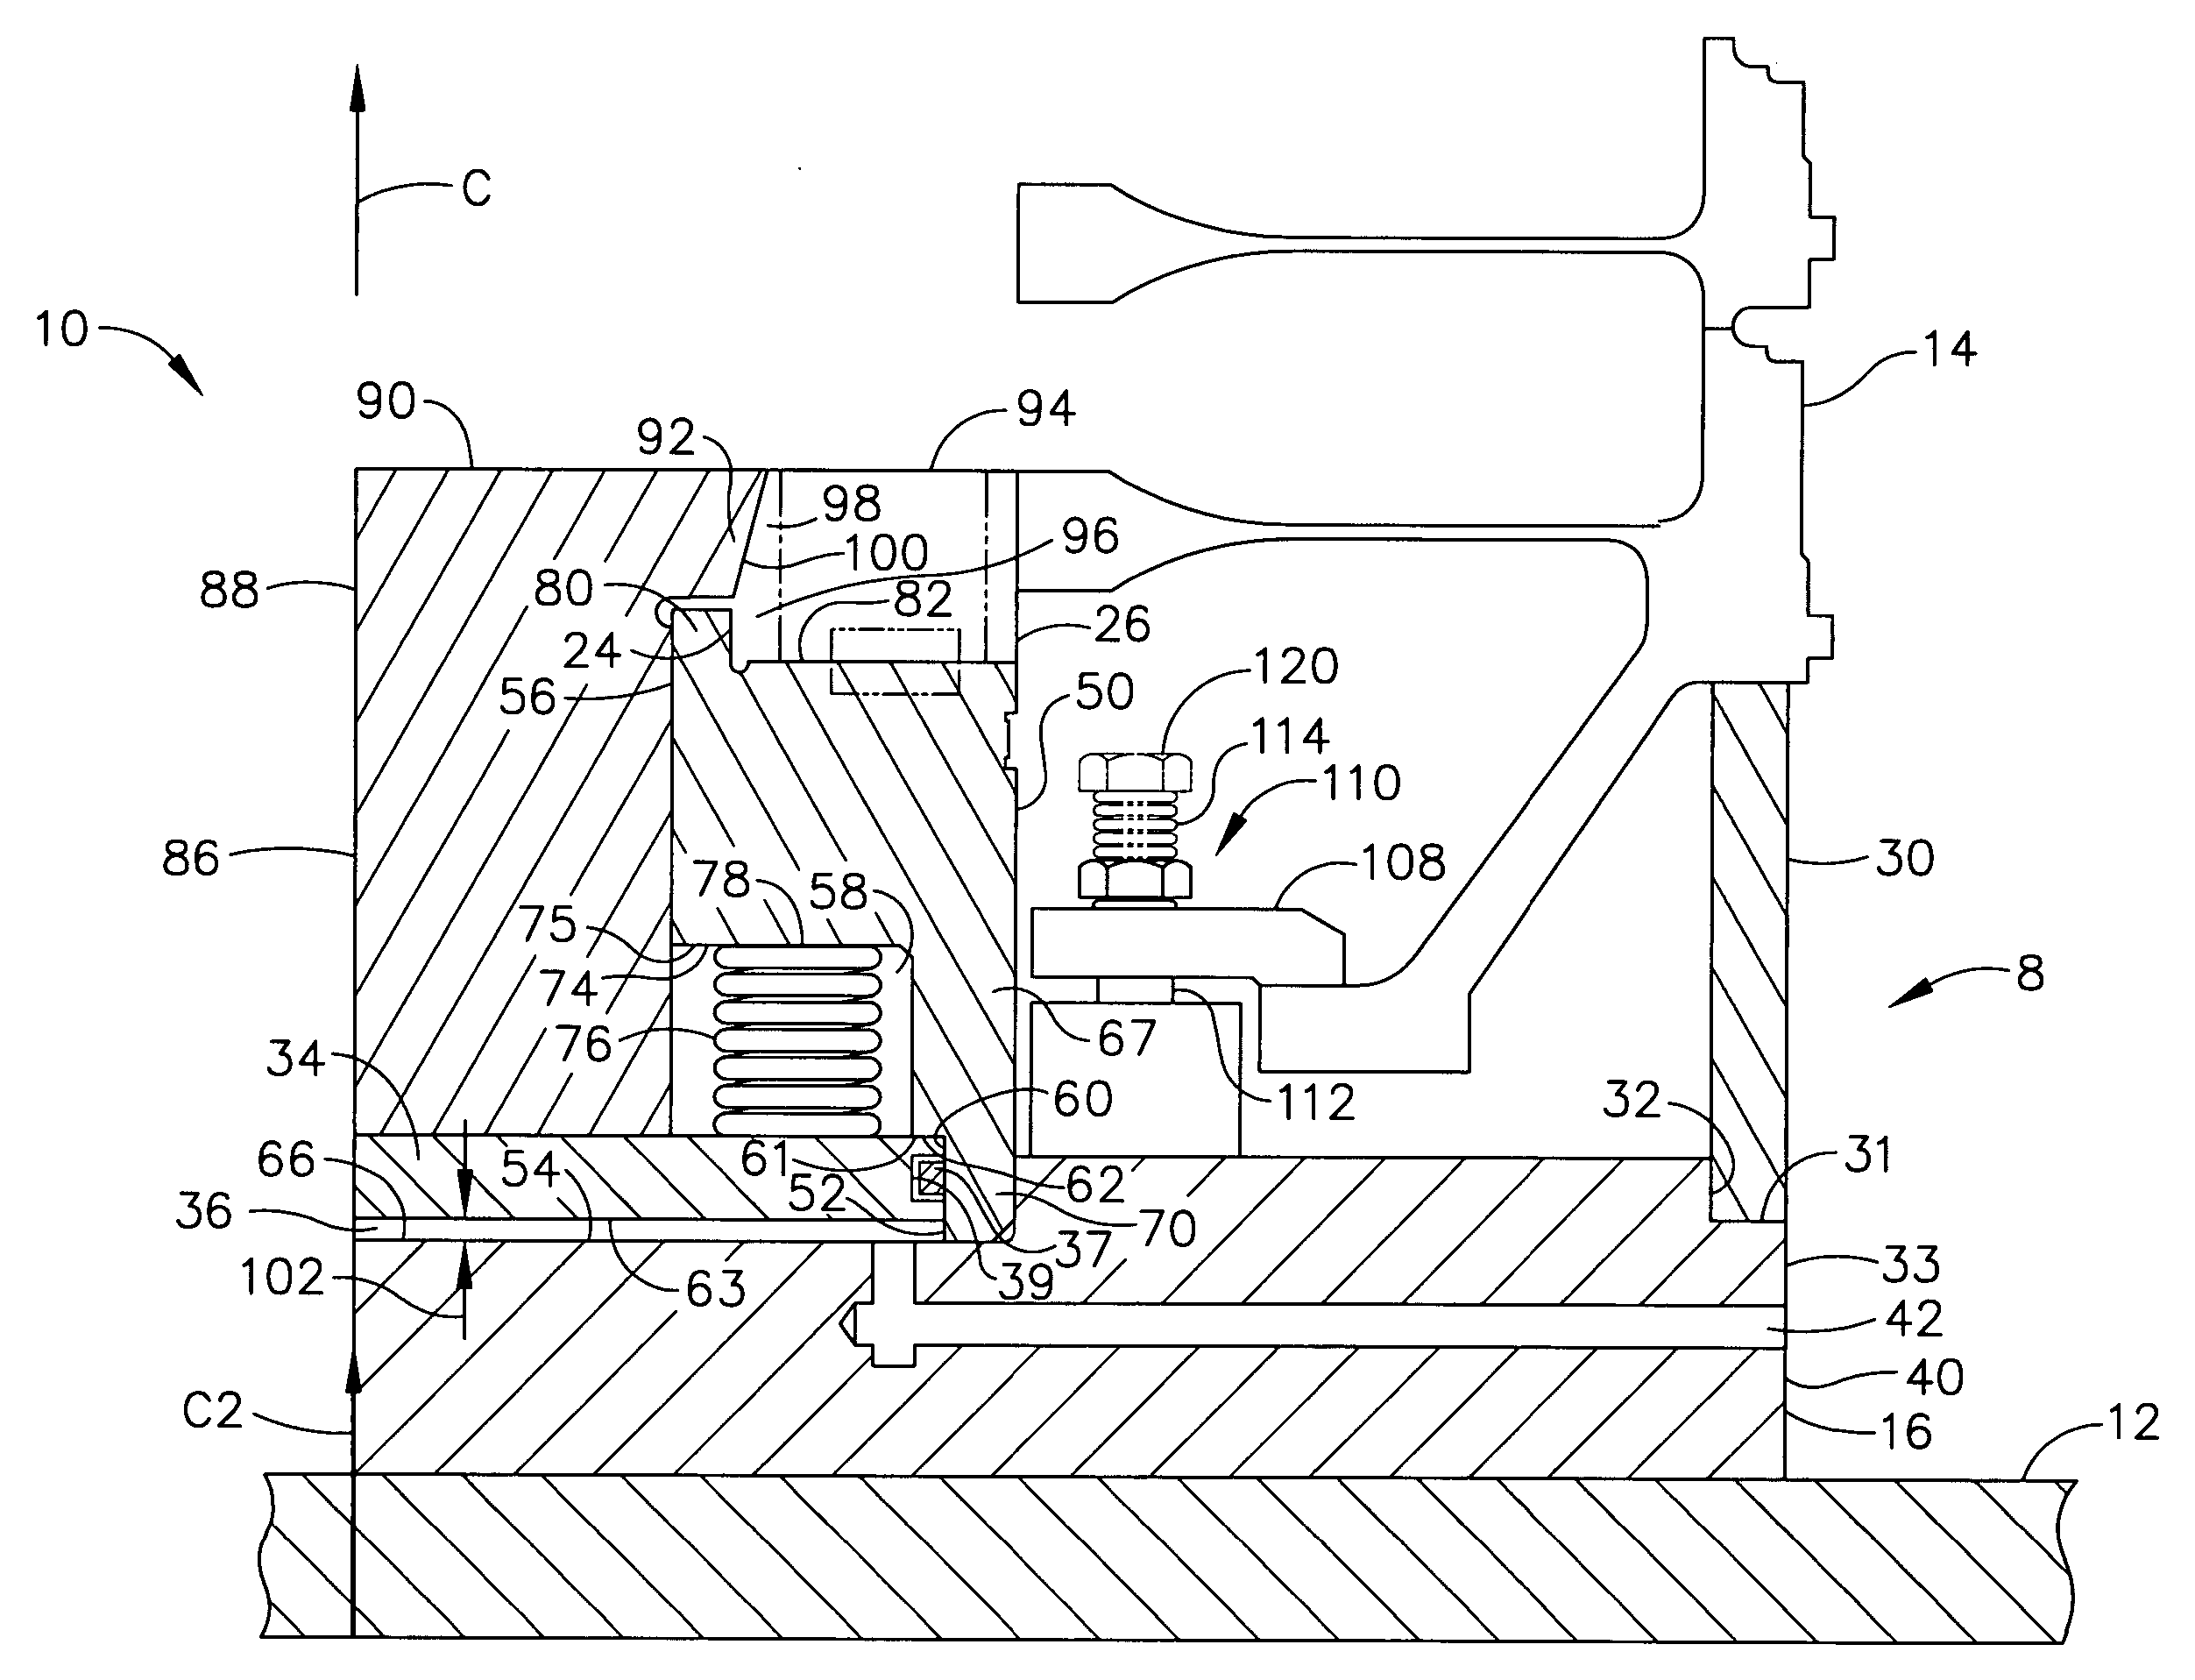 Machining fixture for centering and holding workpiece